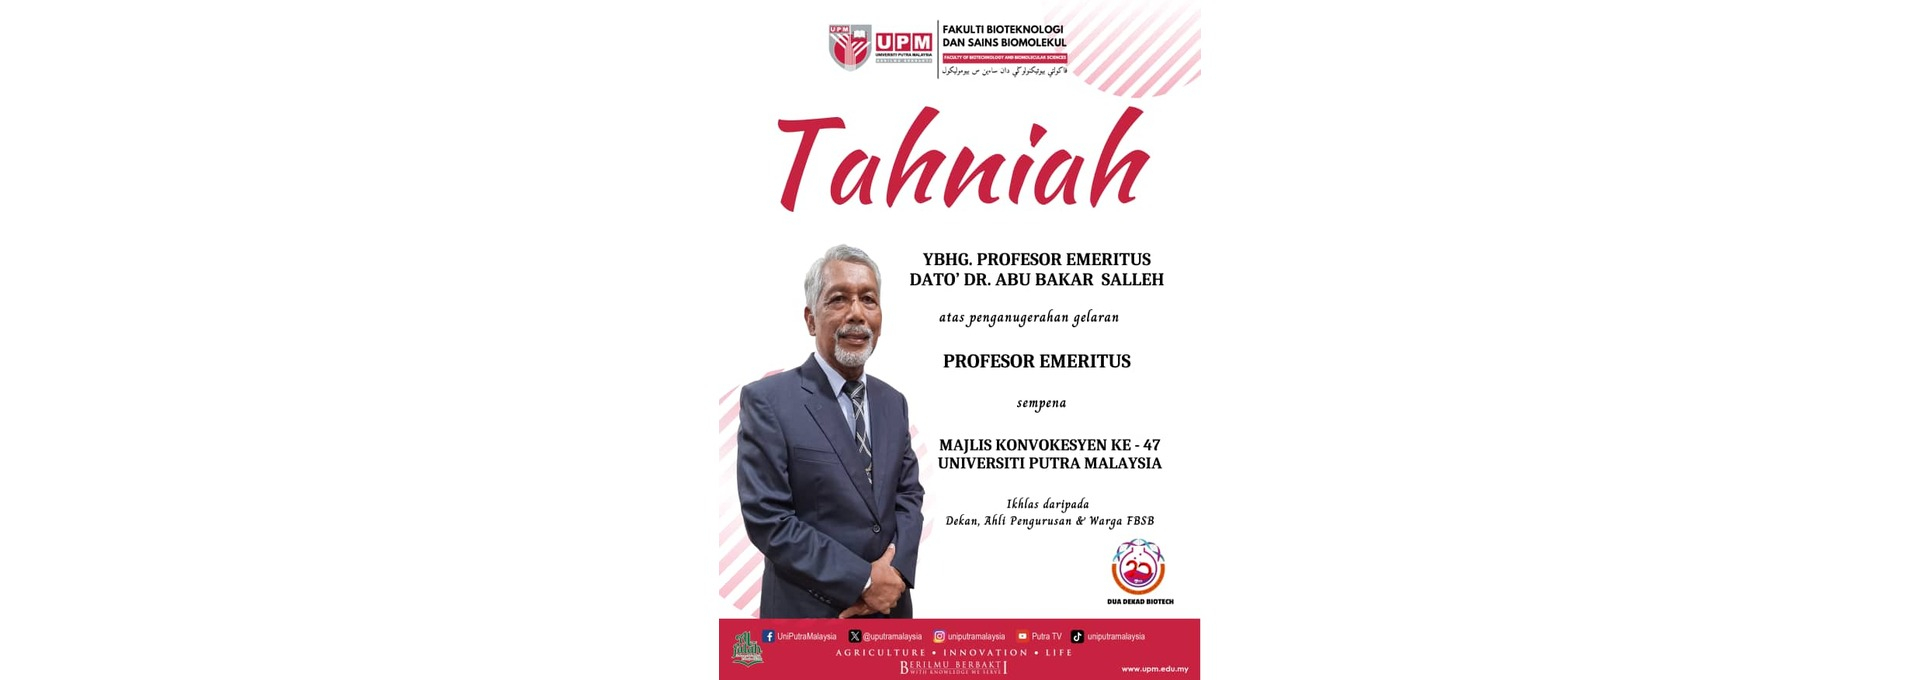 Congratulations on being awarded the title of Prof. Emeritus Dato' Dr. Abu Bakr Saleh